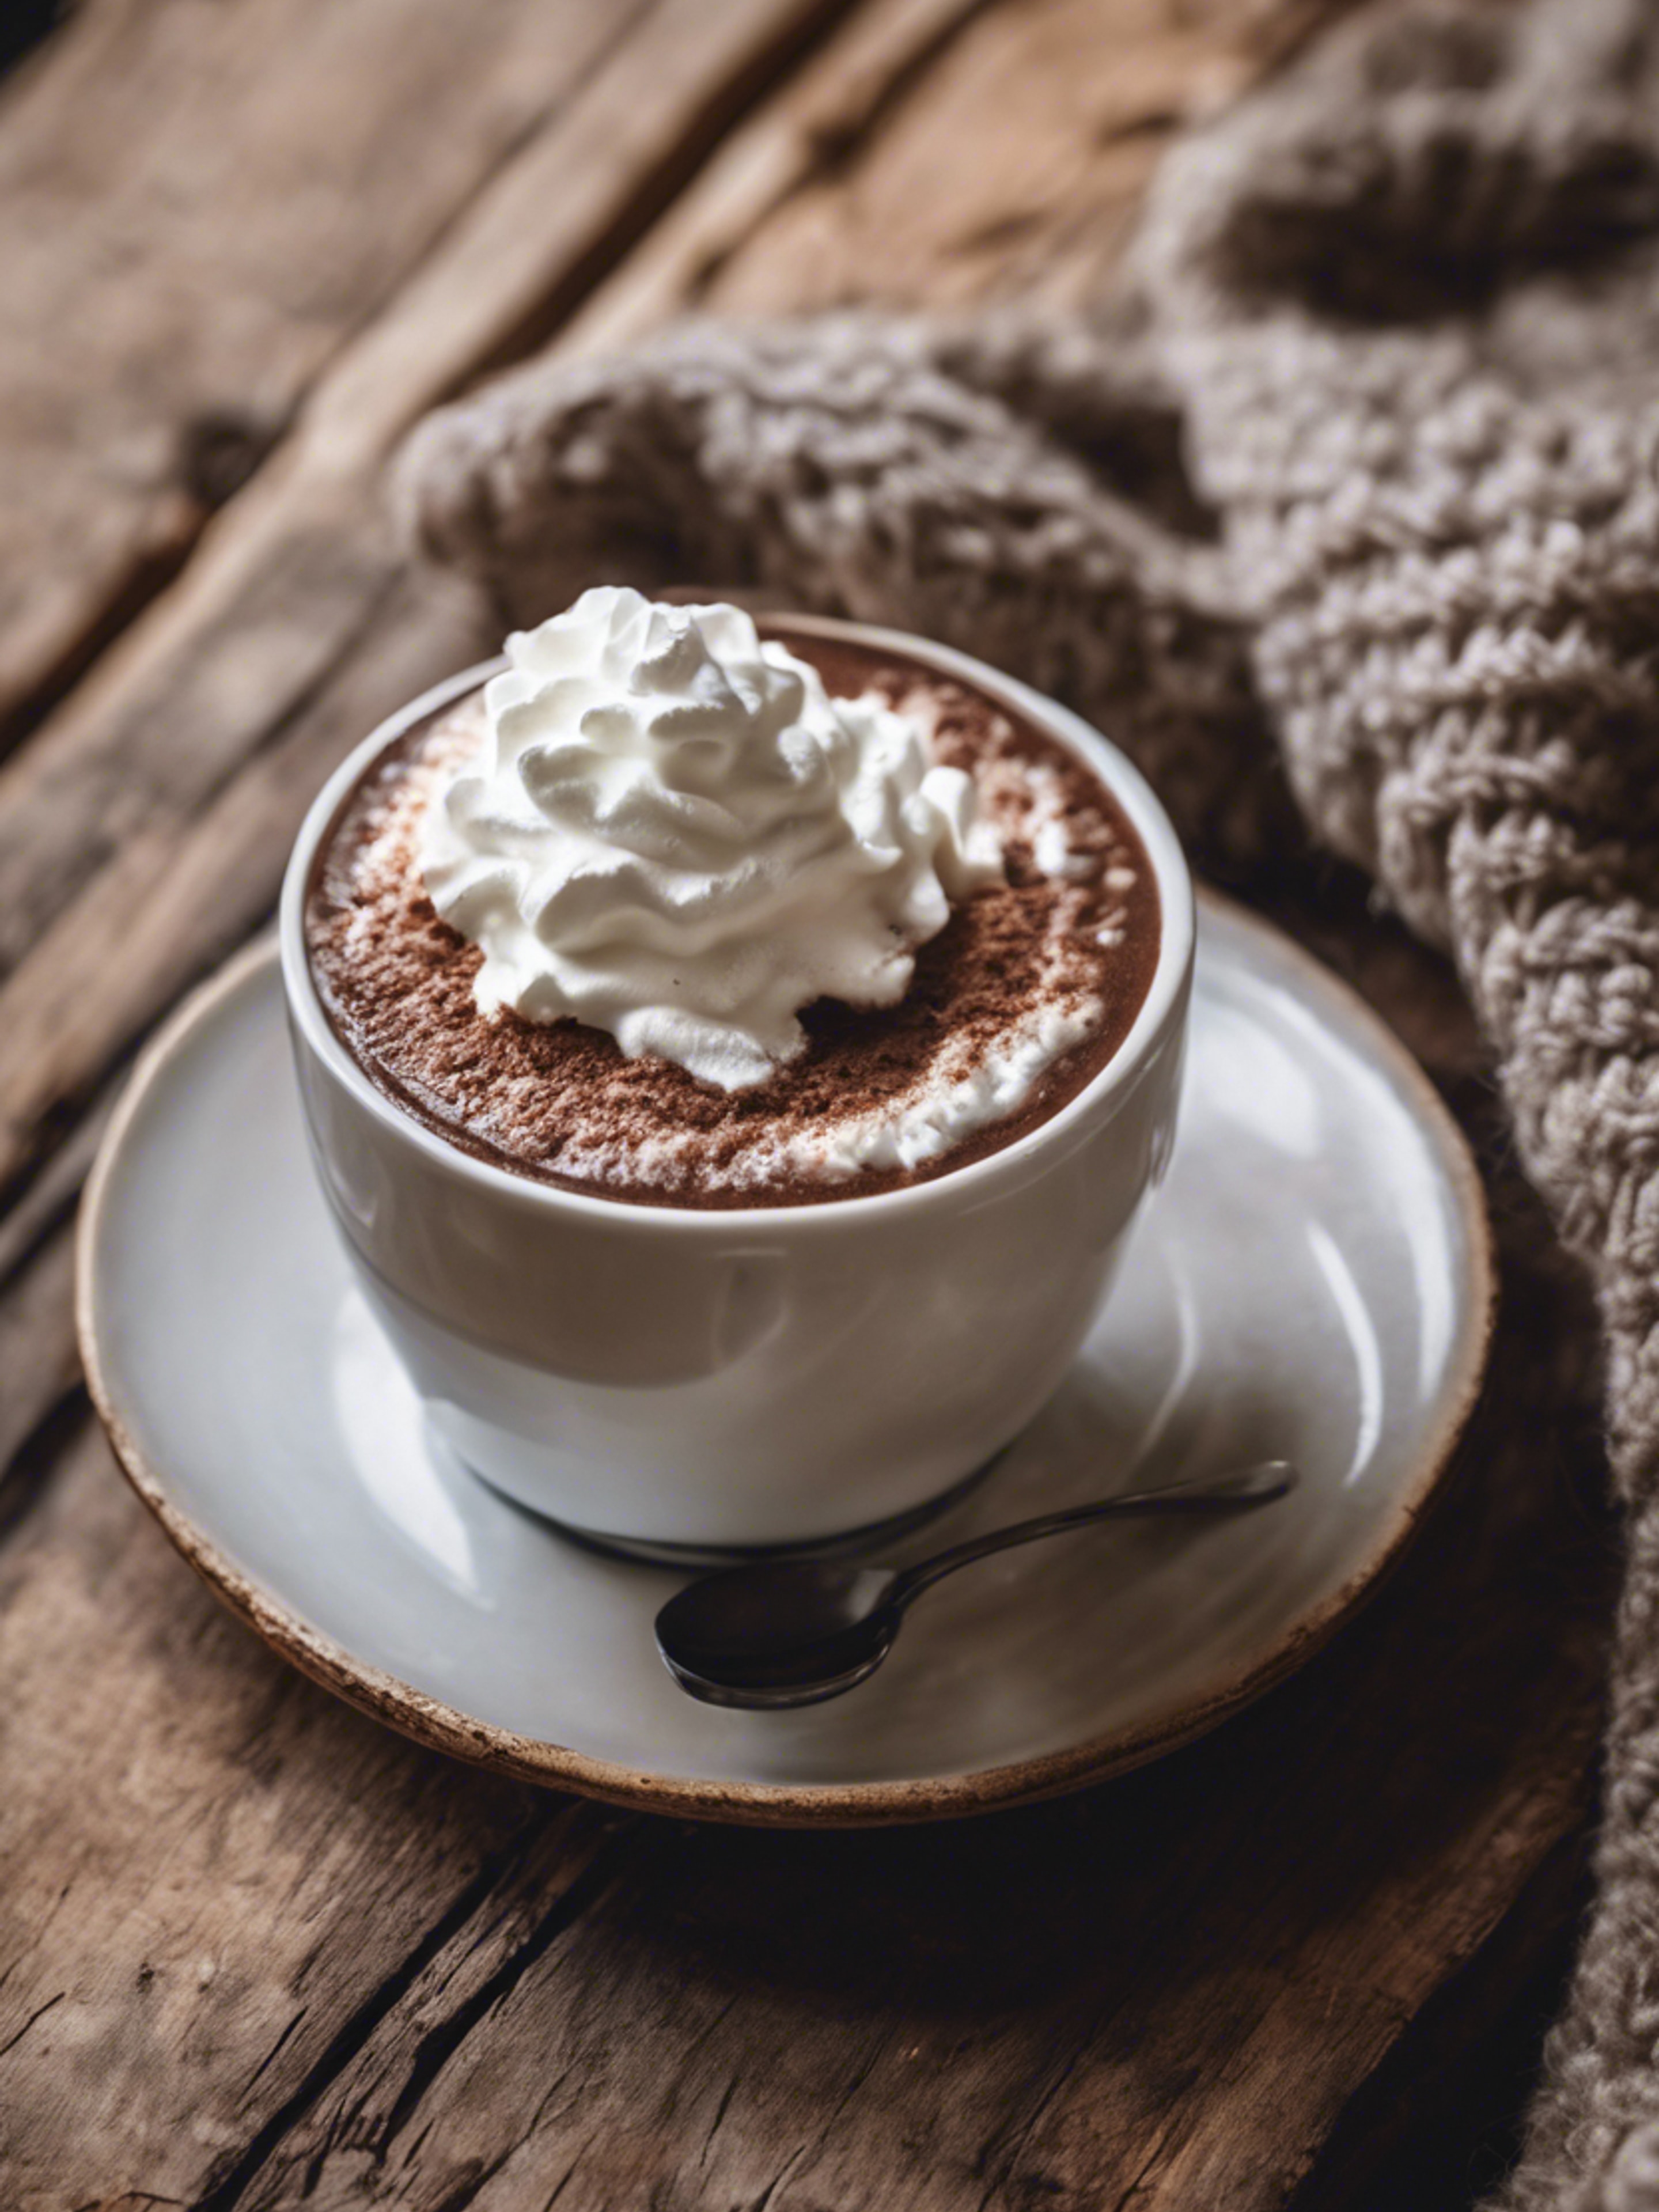 A porcelain cup of steaming hot chocolate topped with whipped cream, next to a crochet coaster on a rough wooden table. Sfondo[f8ececc79cde48c88690]